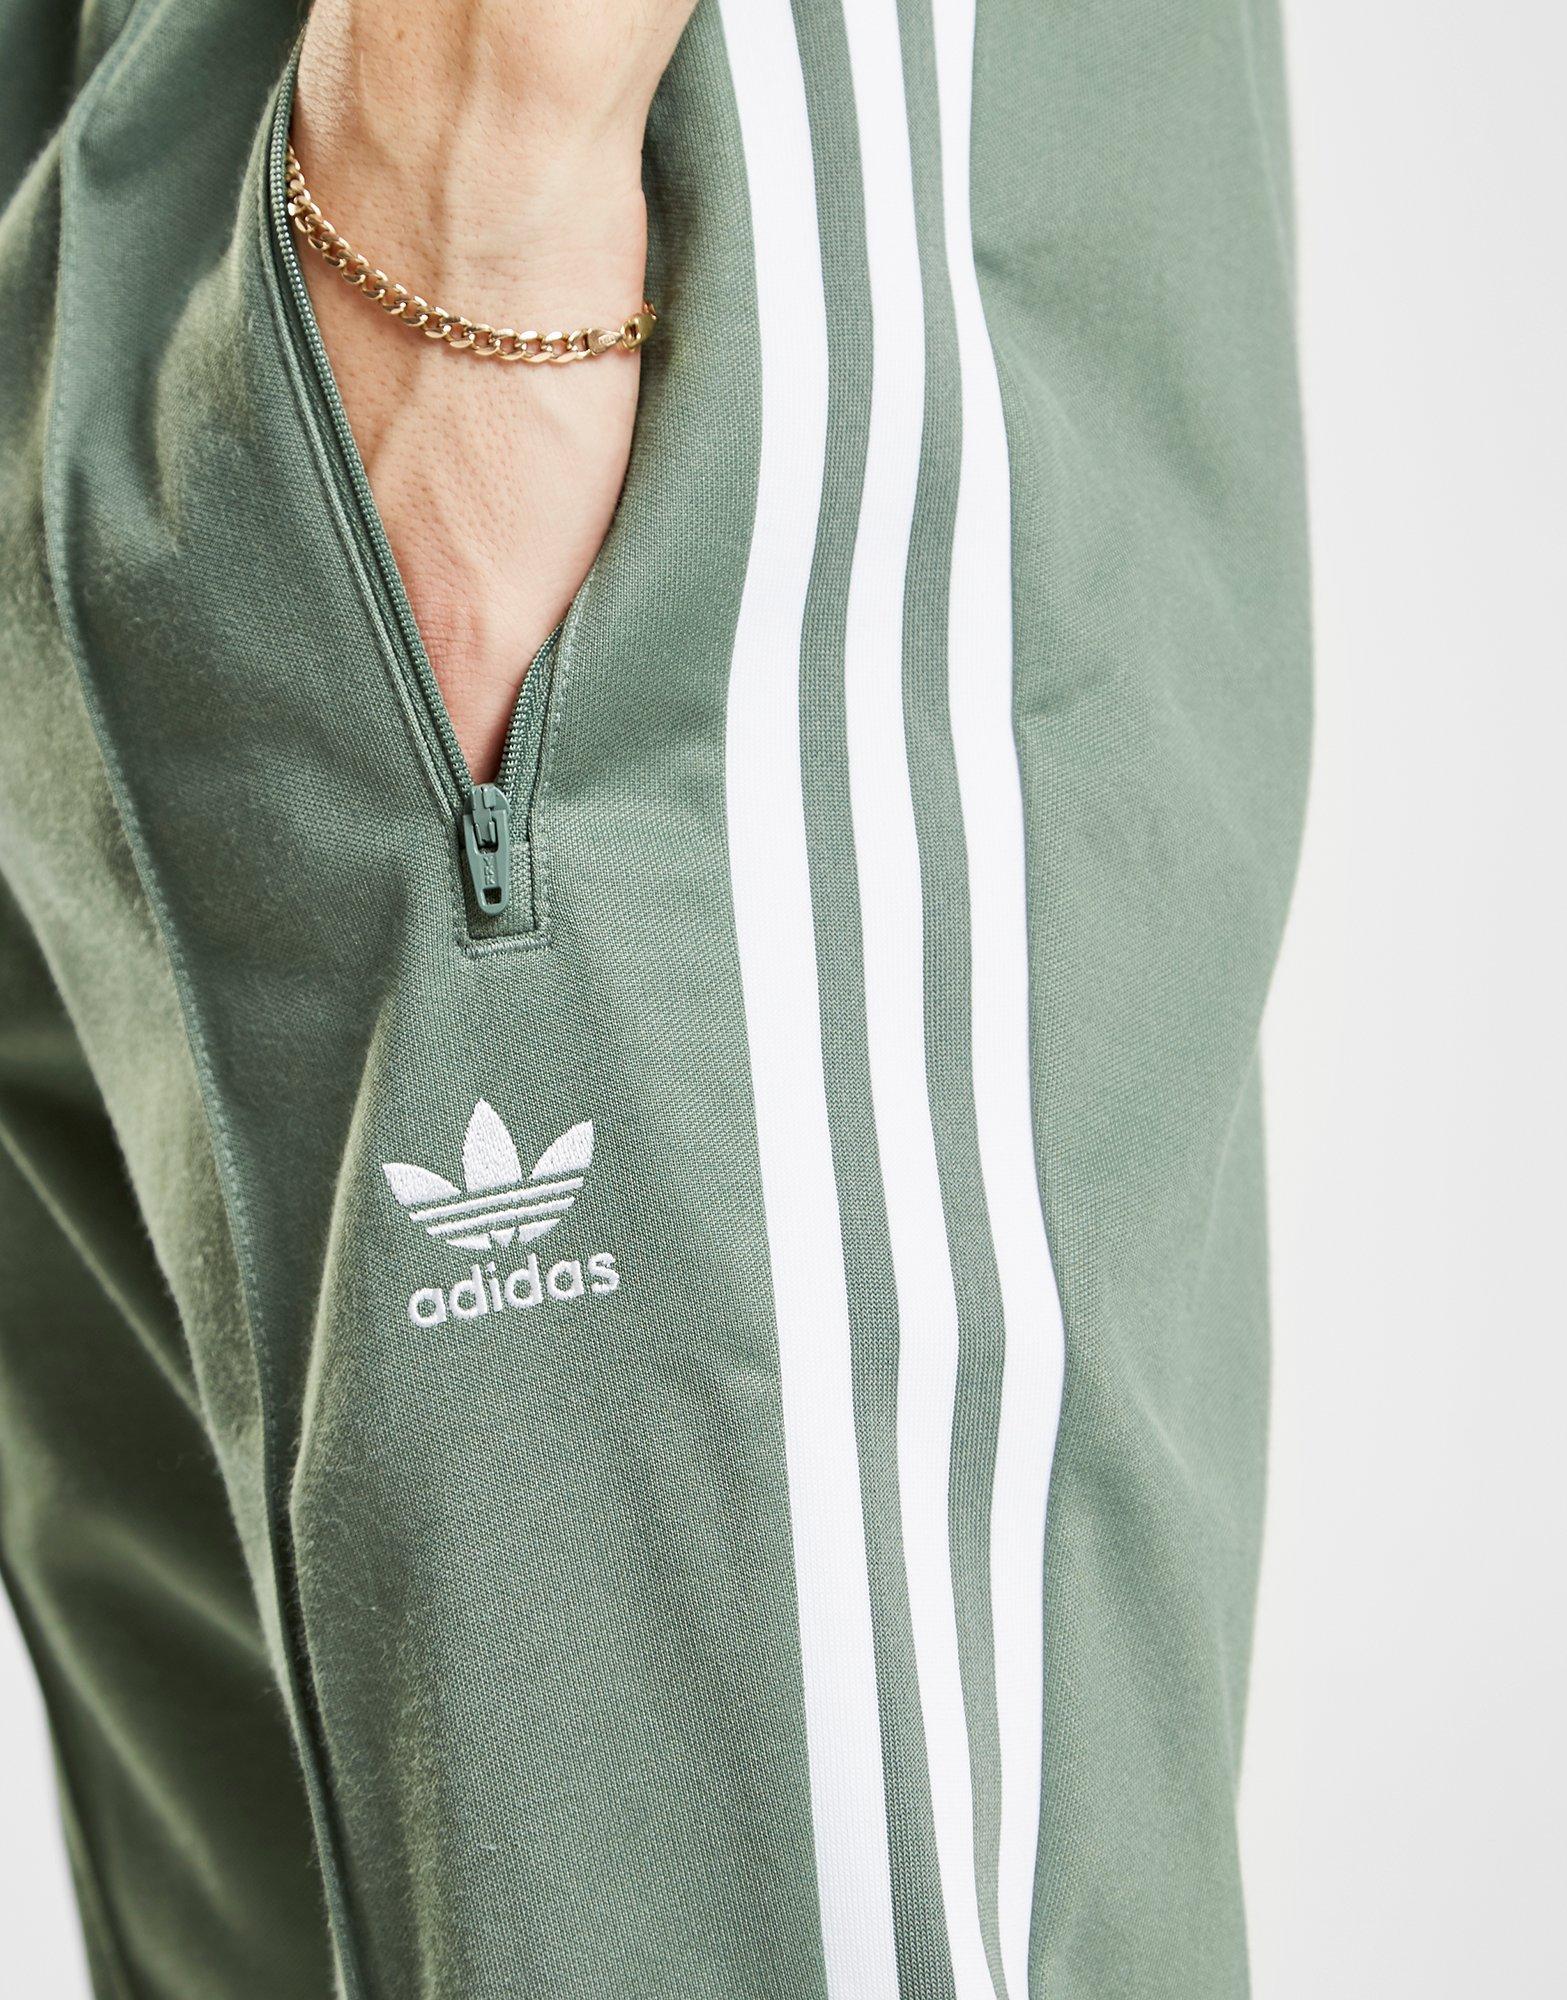 adidas Bb Track Pants in Green for Men - Lyst